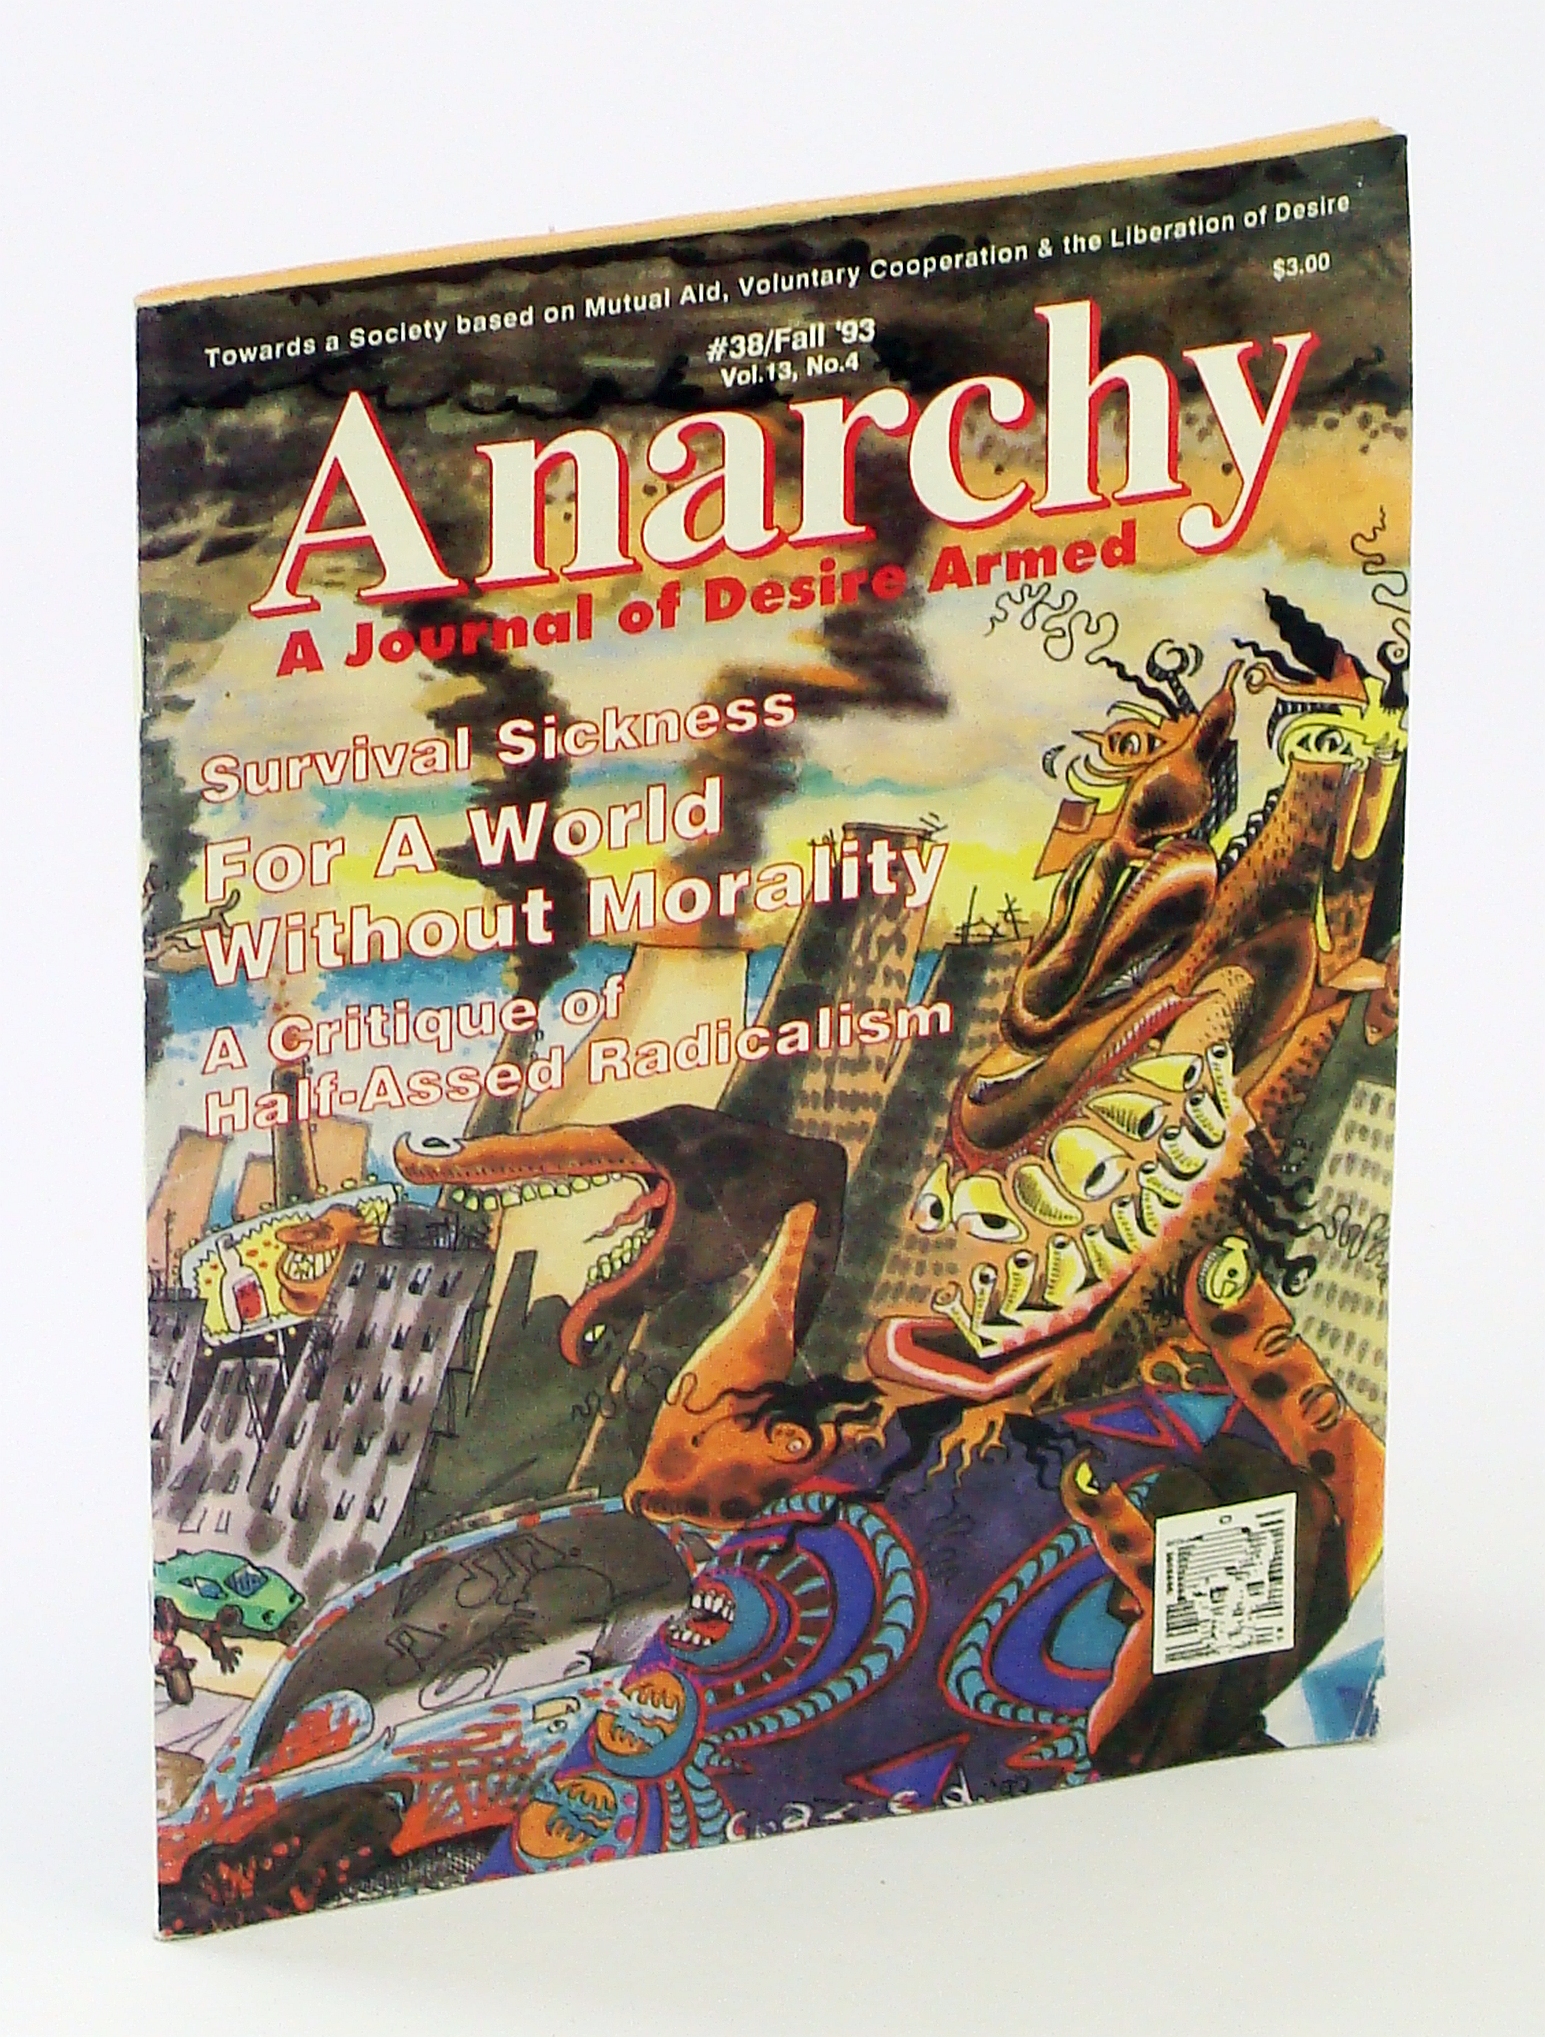 Image for Anarchy [Magazine] A Journal of Desire Armed, #38, Fall '93 [1993] Vol 13, No. 4: In the Aftermath of the Spanish Civil War - Adios, Catalonia